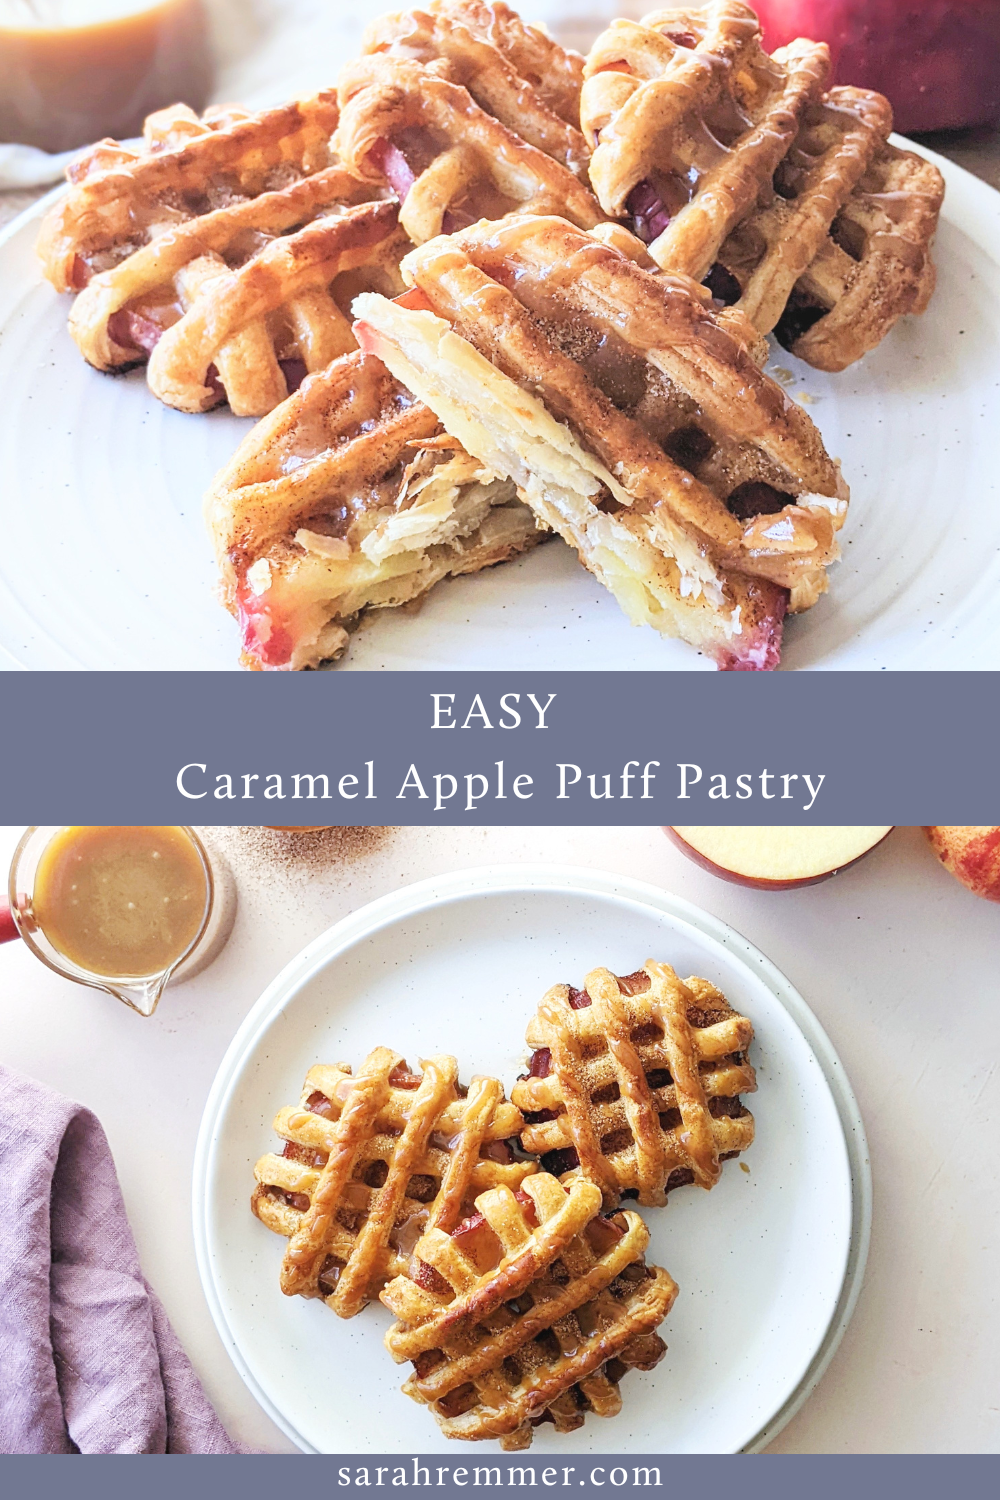 This caramel apple puff pastry comes together easily! Your family will adore these delightful, mess-free treats.